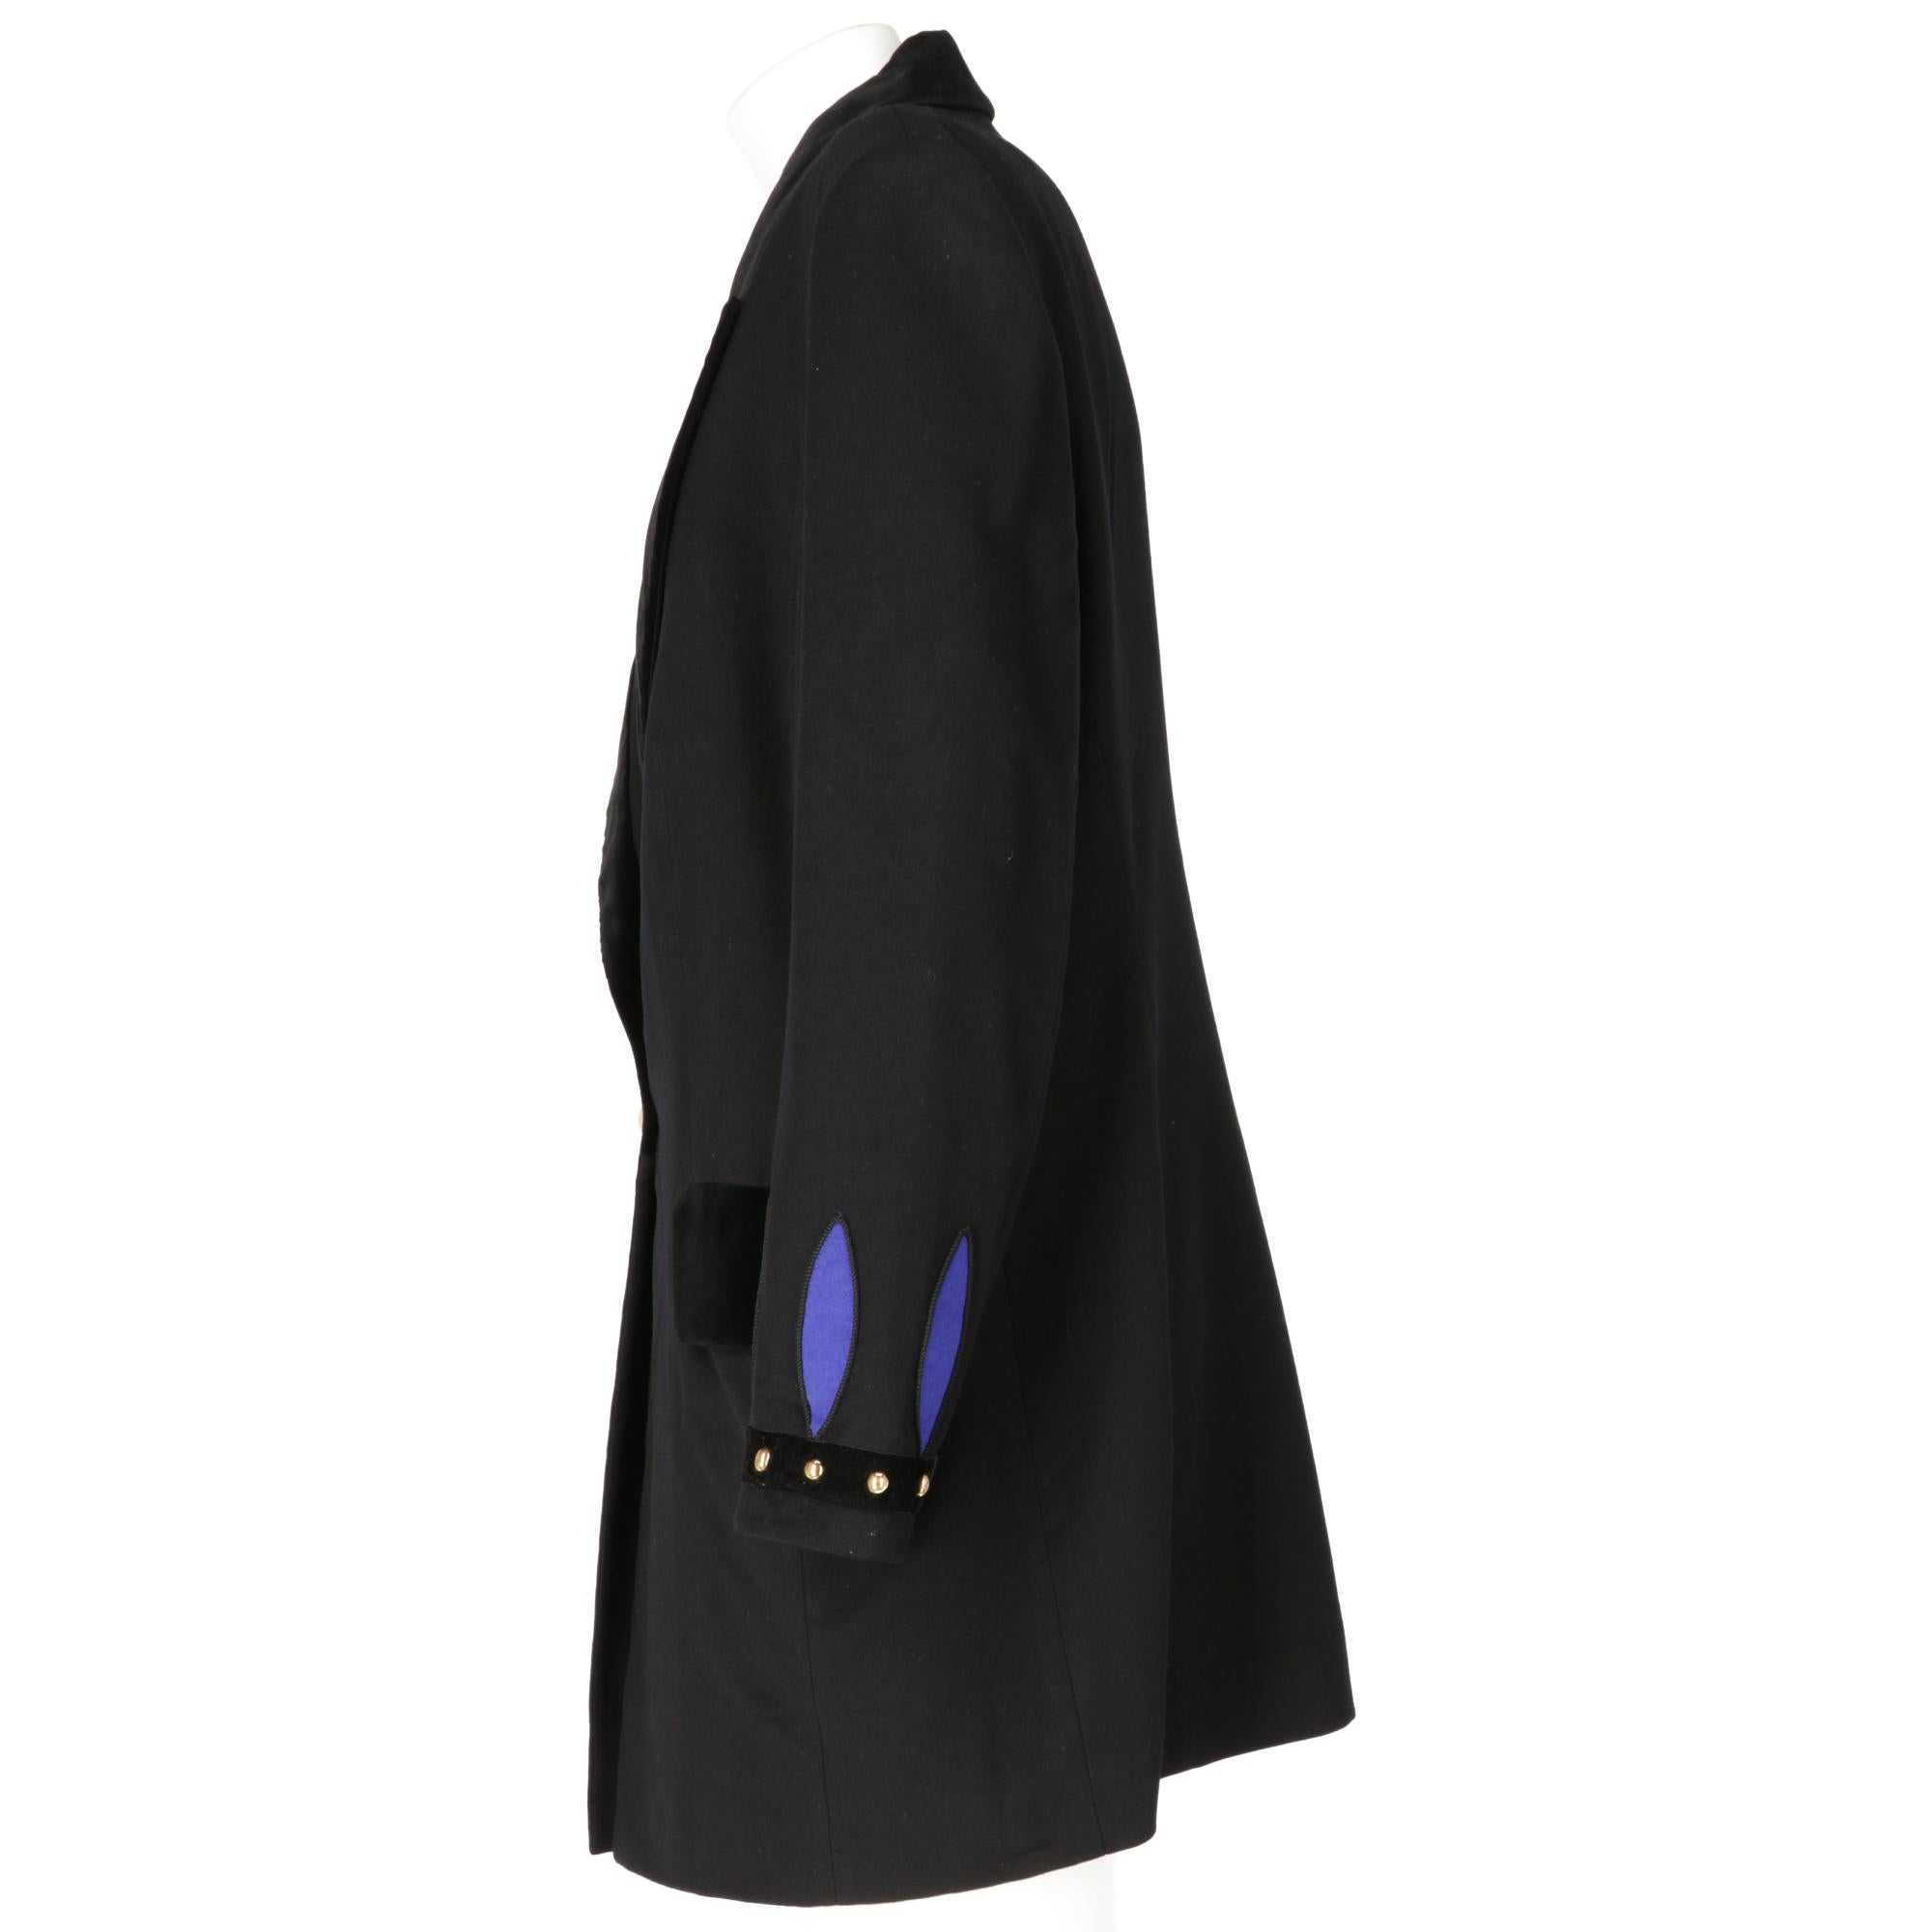 Louis Féraud black blazer in wool and angora blend, with classic velvet spear collar, long sleeves with embroidered blue details and velvet strip with golden metal studs, front closure with jewel button and two pockets with velvet flap. Lining with